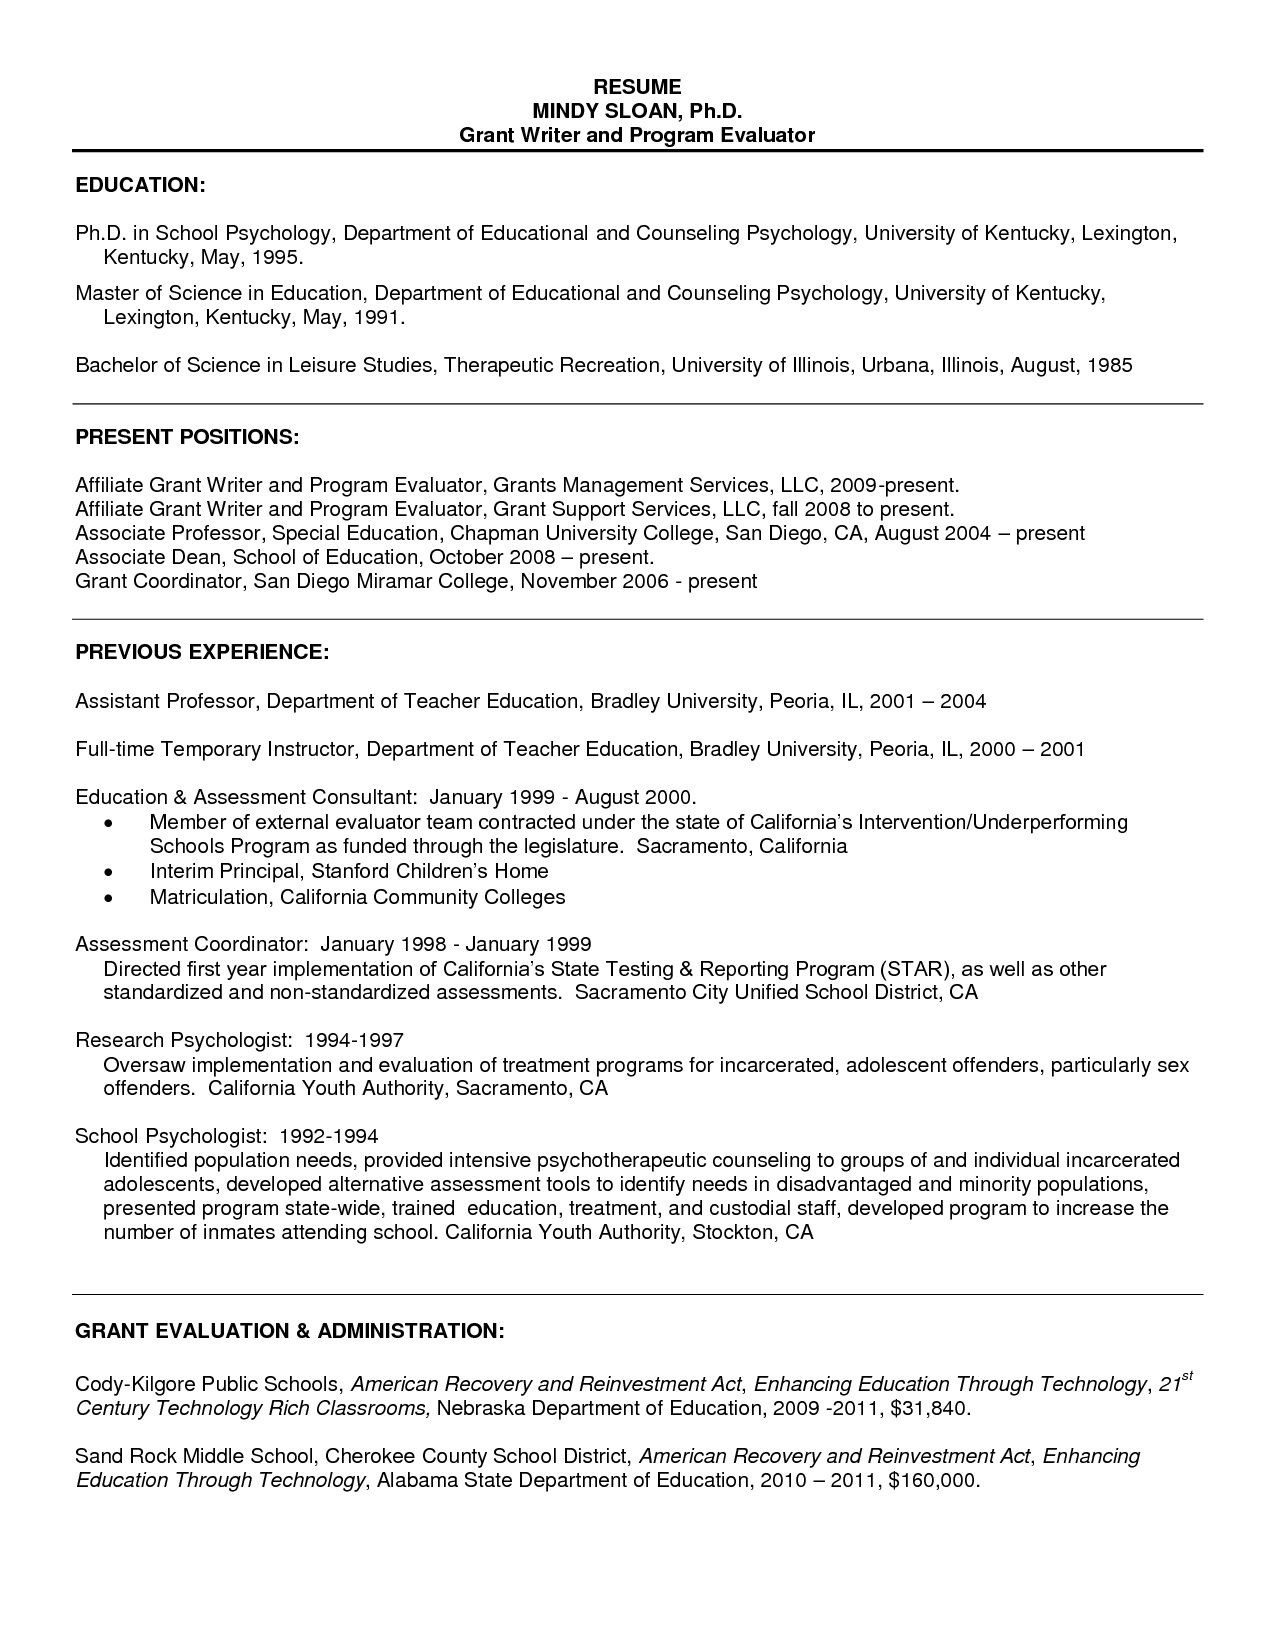 Graduate School Resume Template for Admissions Resume Sample for Psychology Graduate Free Resume Templates …